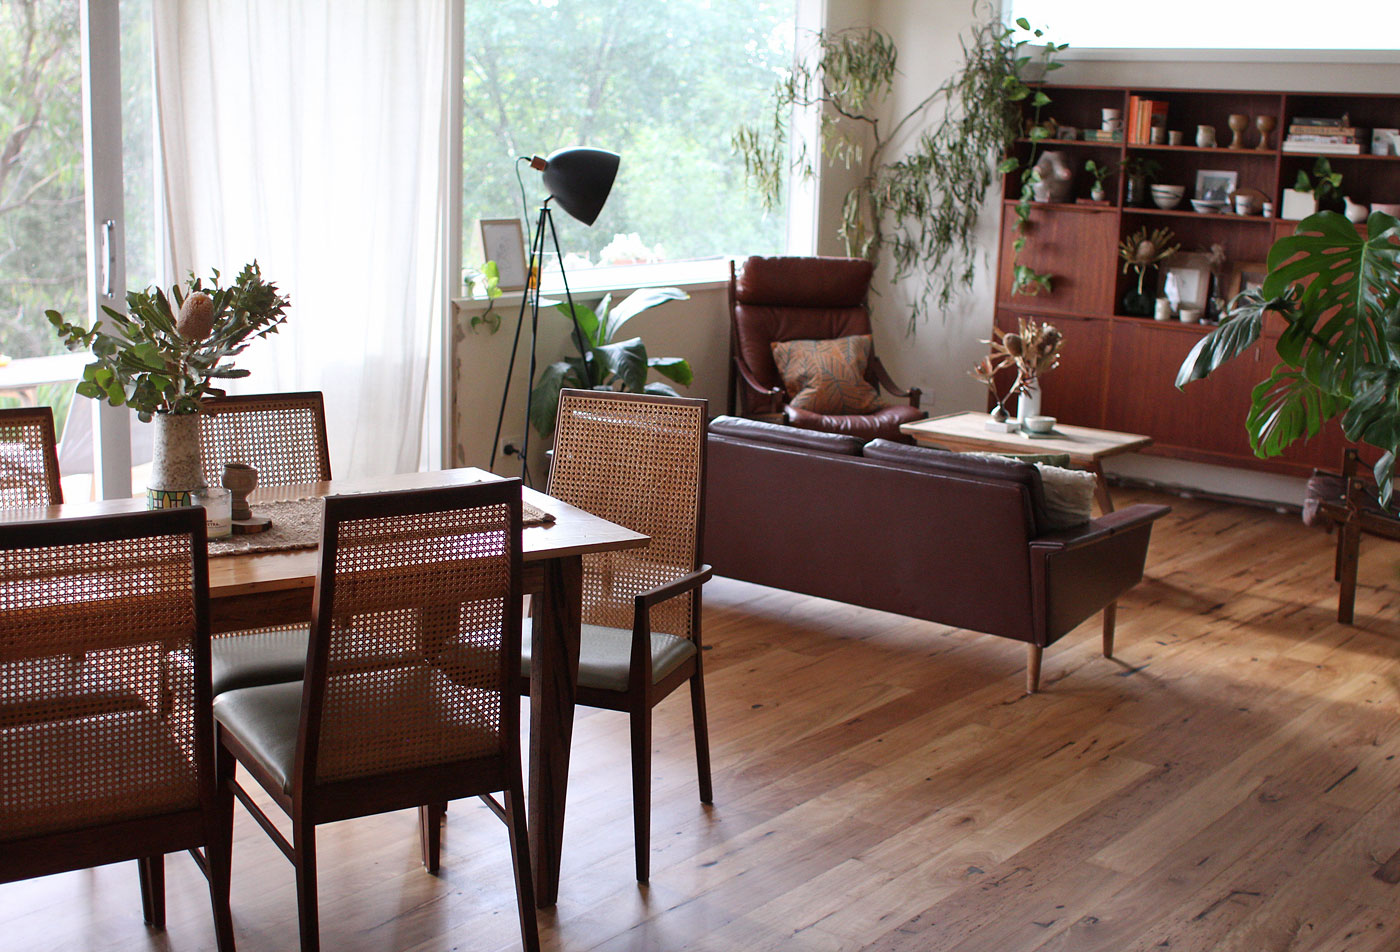 @patandruby living room with secondhand furniture